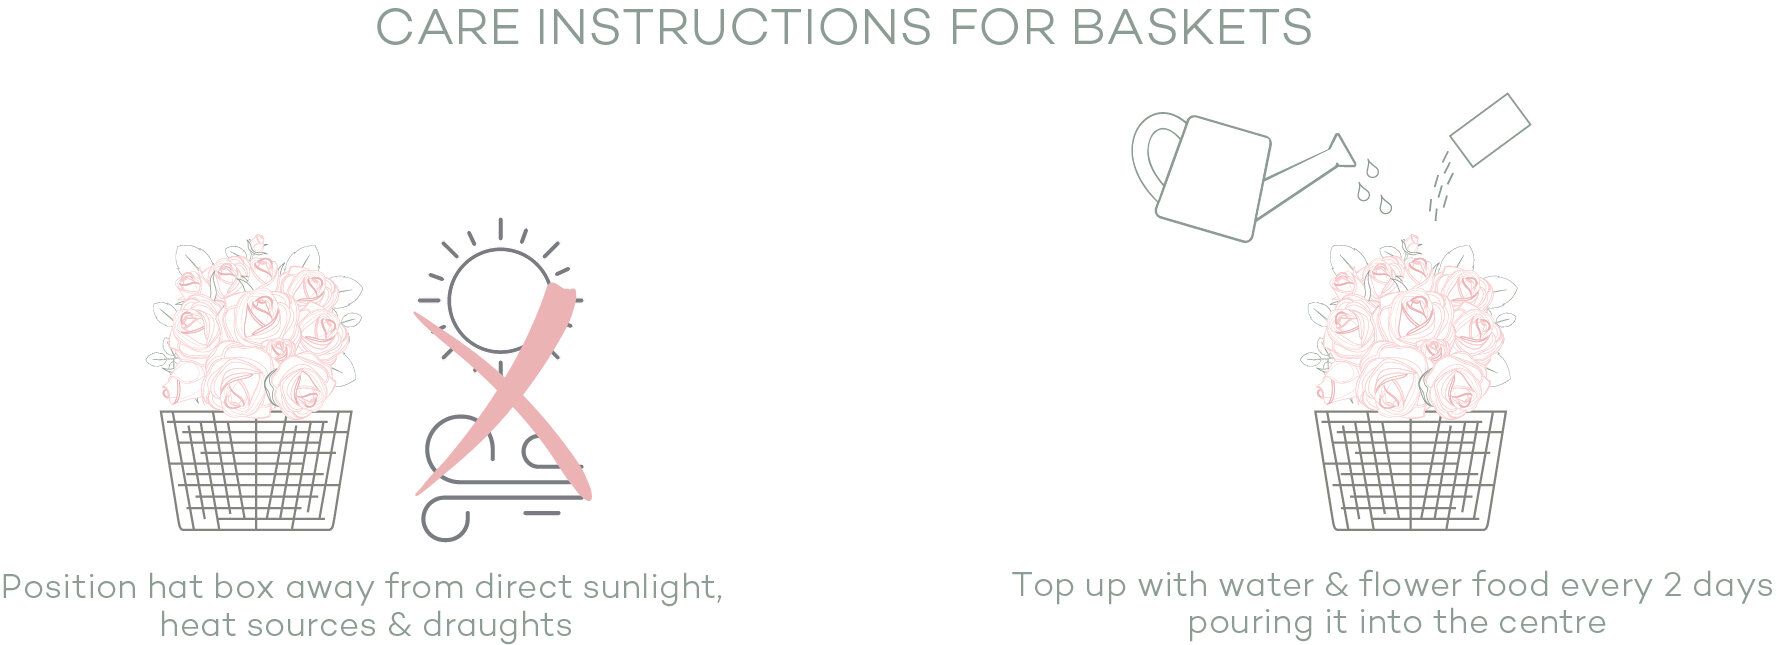 Care Instructions for Baskets.jpg